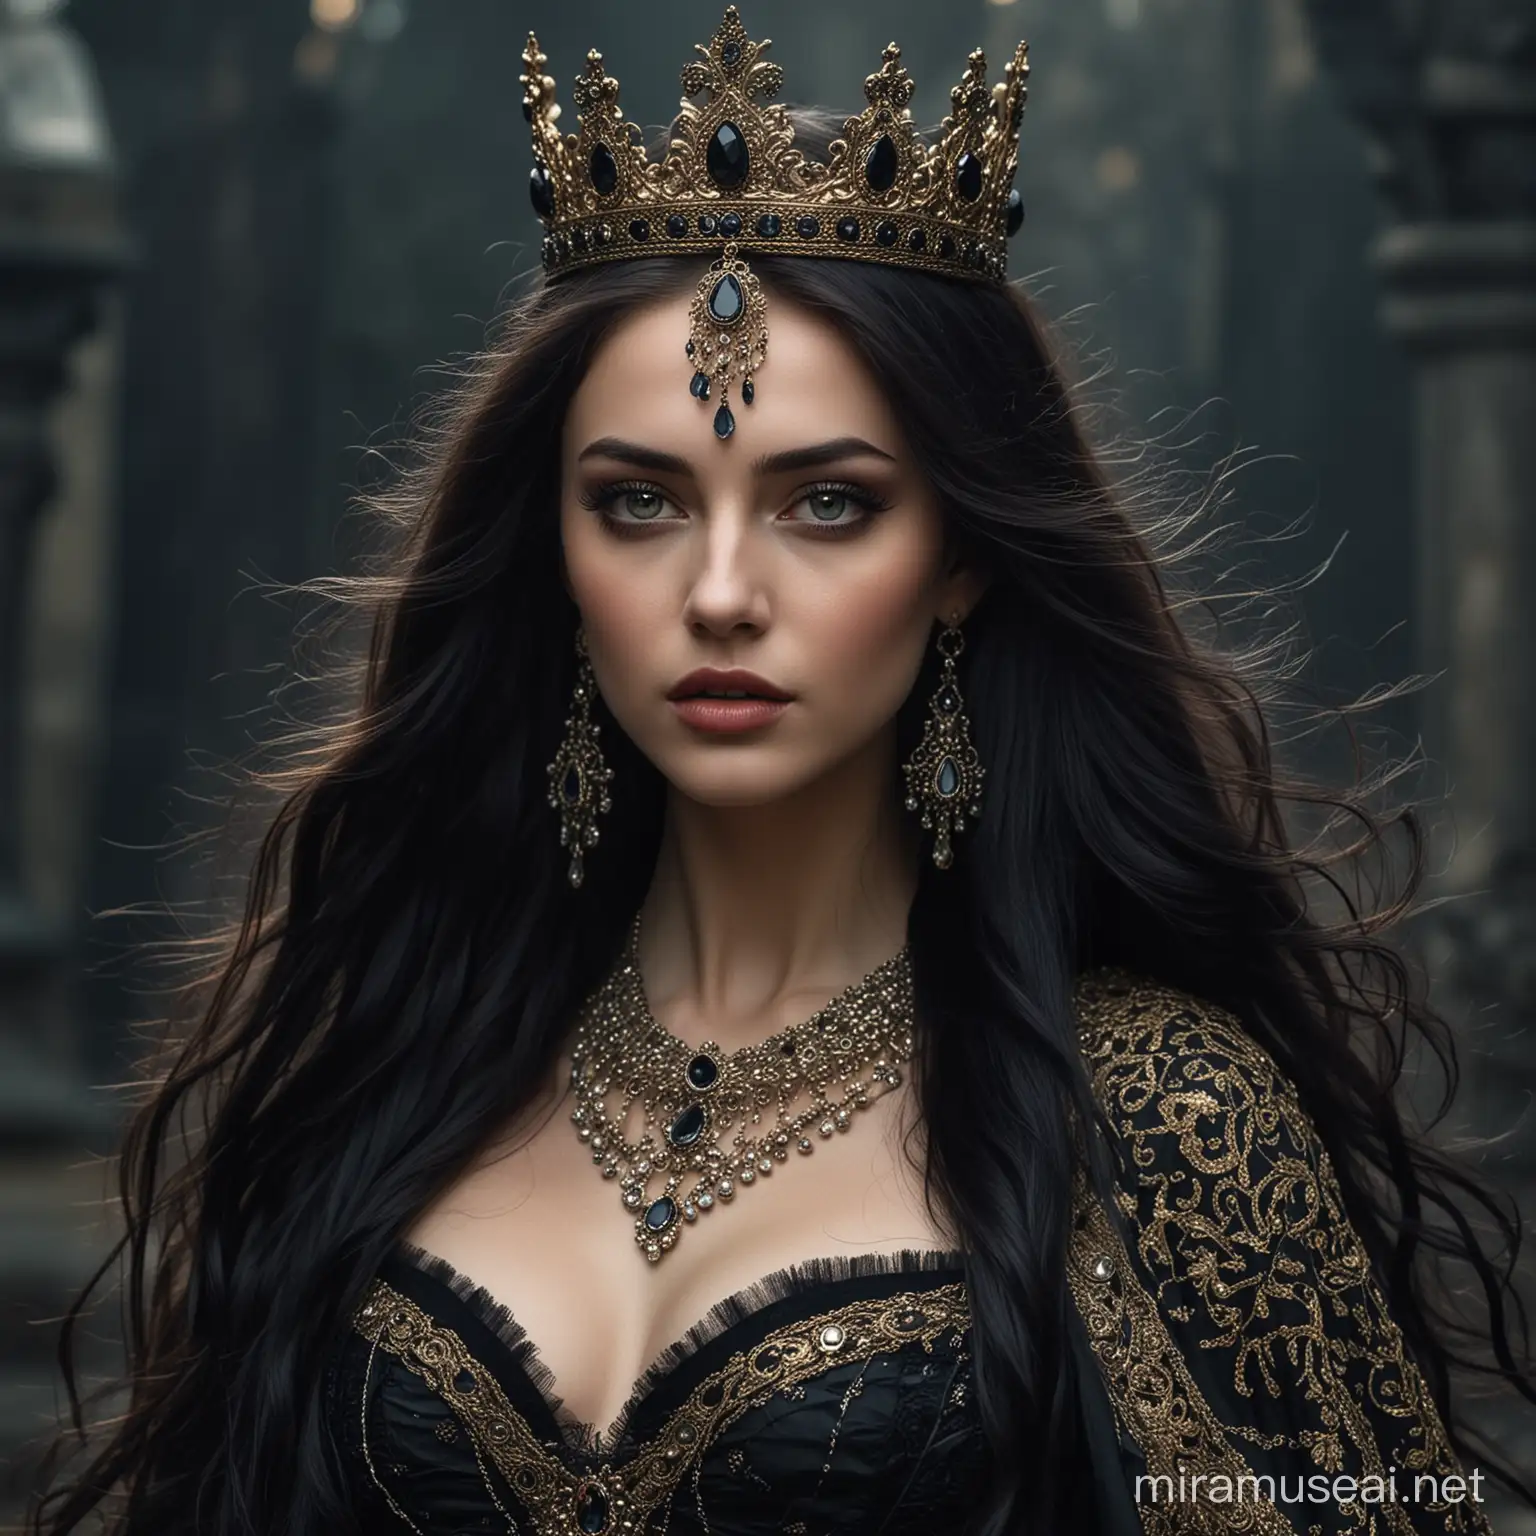 She is Queen, figure of beauty and darkness, her regal presence commanding both fear and awe. With long flowing hair as black as midnight and piercing eyes that gleam with malevolent intent, she exudes an aura of power and cunning. Her regal attire, adorned with jewels and fine fabrics, hints at her royal status, while her graceful movements betray a deadly elegance that belies her sinister nature.